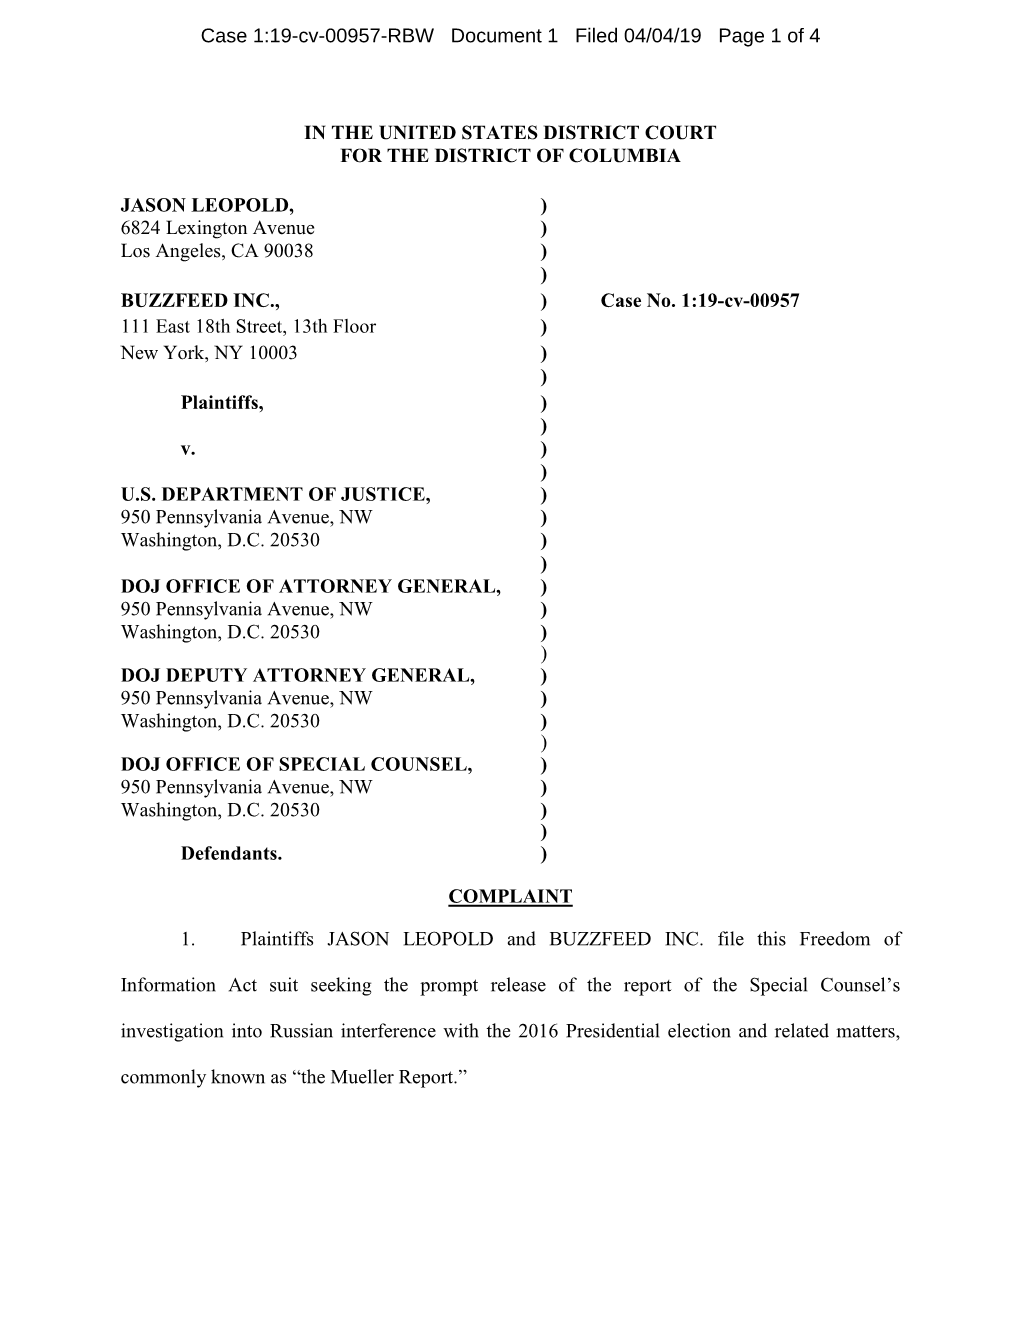 Case 1:19-Cv-00957-RBW Document 1 Filed 04/04/19 Page 1 of 4